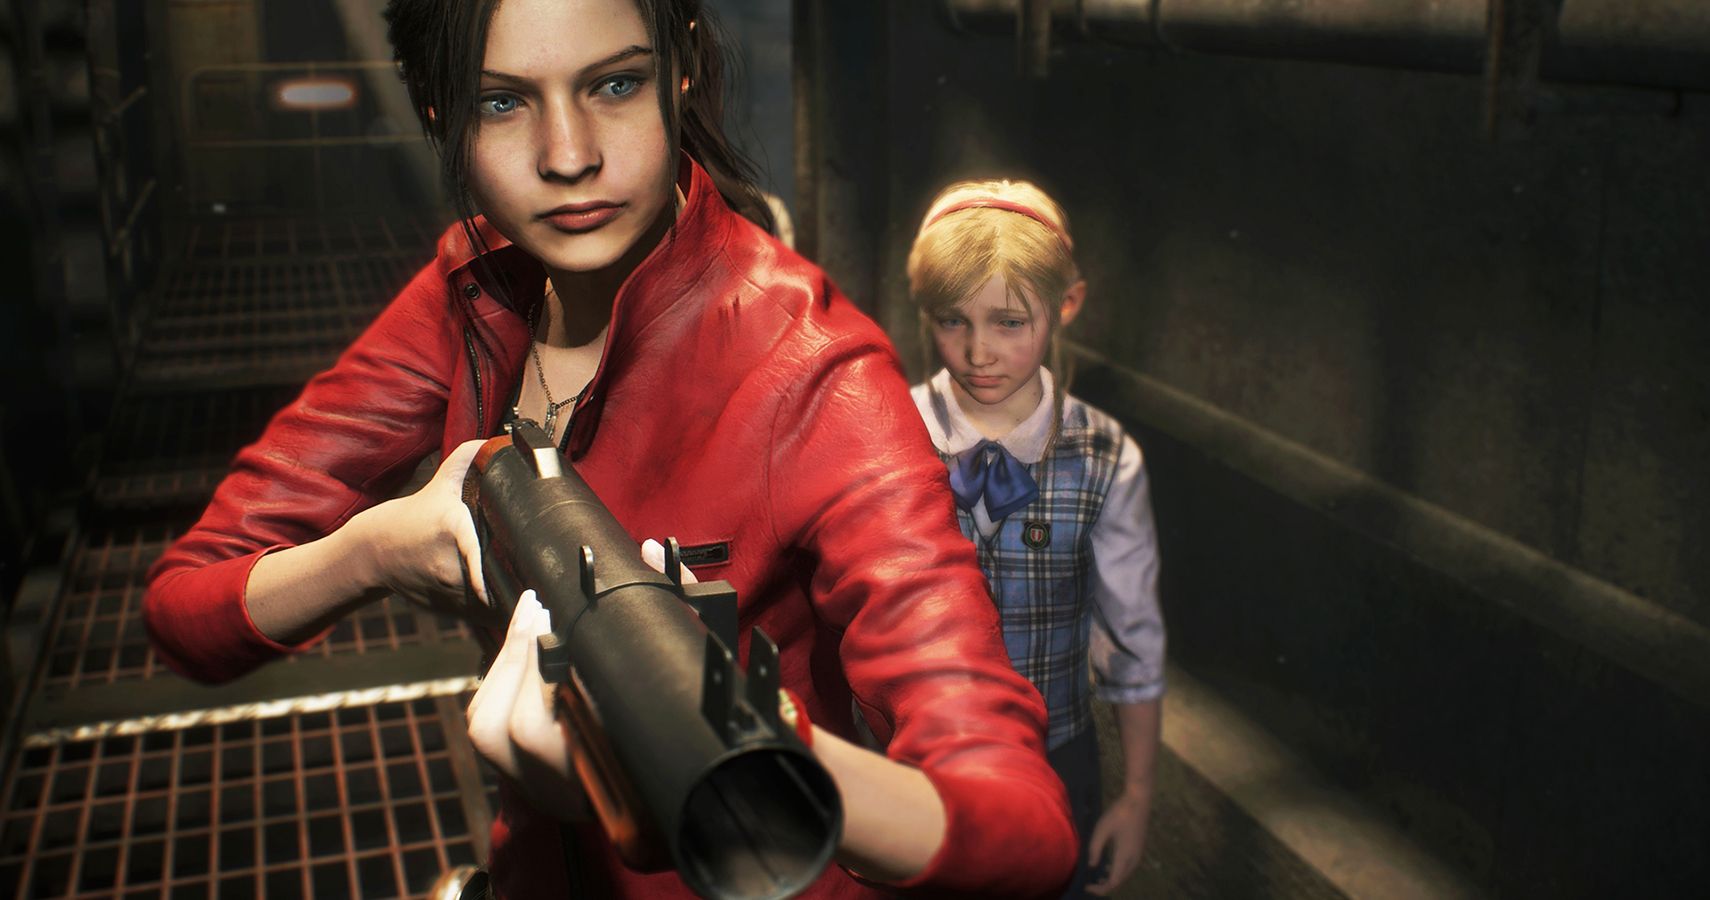 Rumor Claire Likely To Return In Next Resident Evil Game